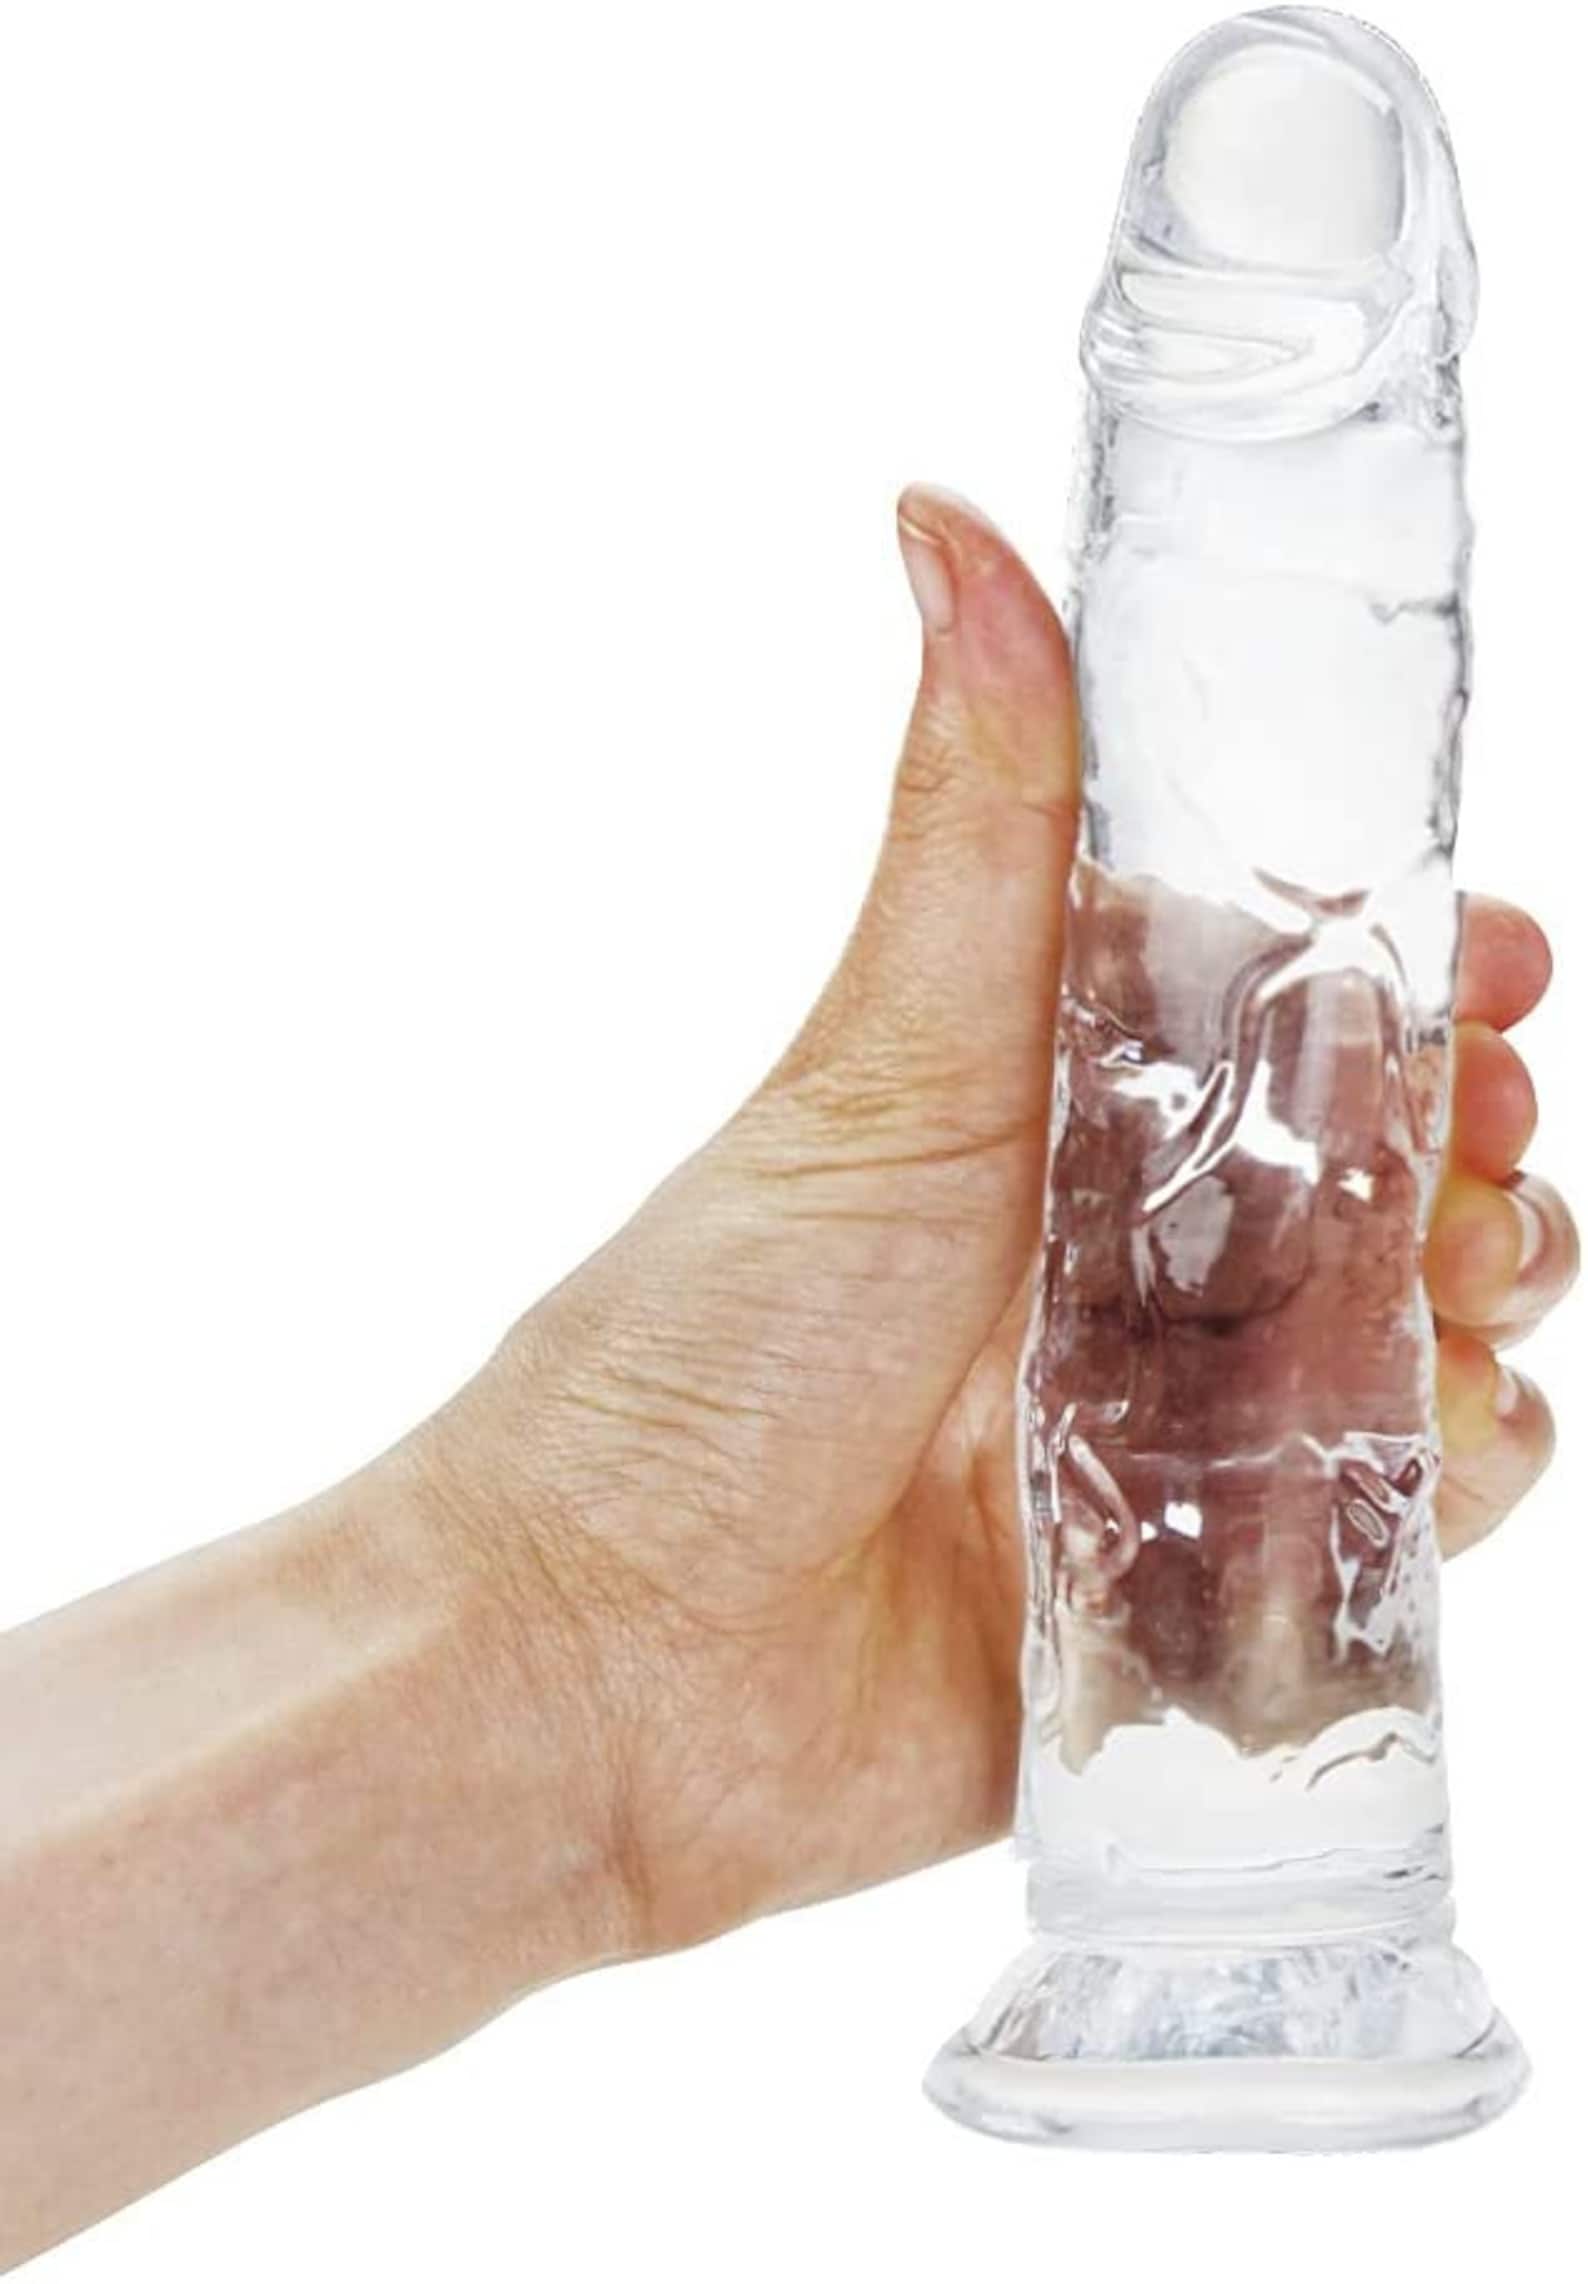 Suction Cup Dildo Beginner Clear Jelly Dildo For Woman Etsy